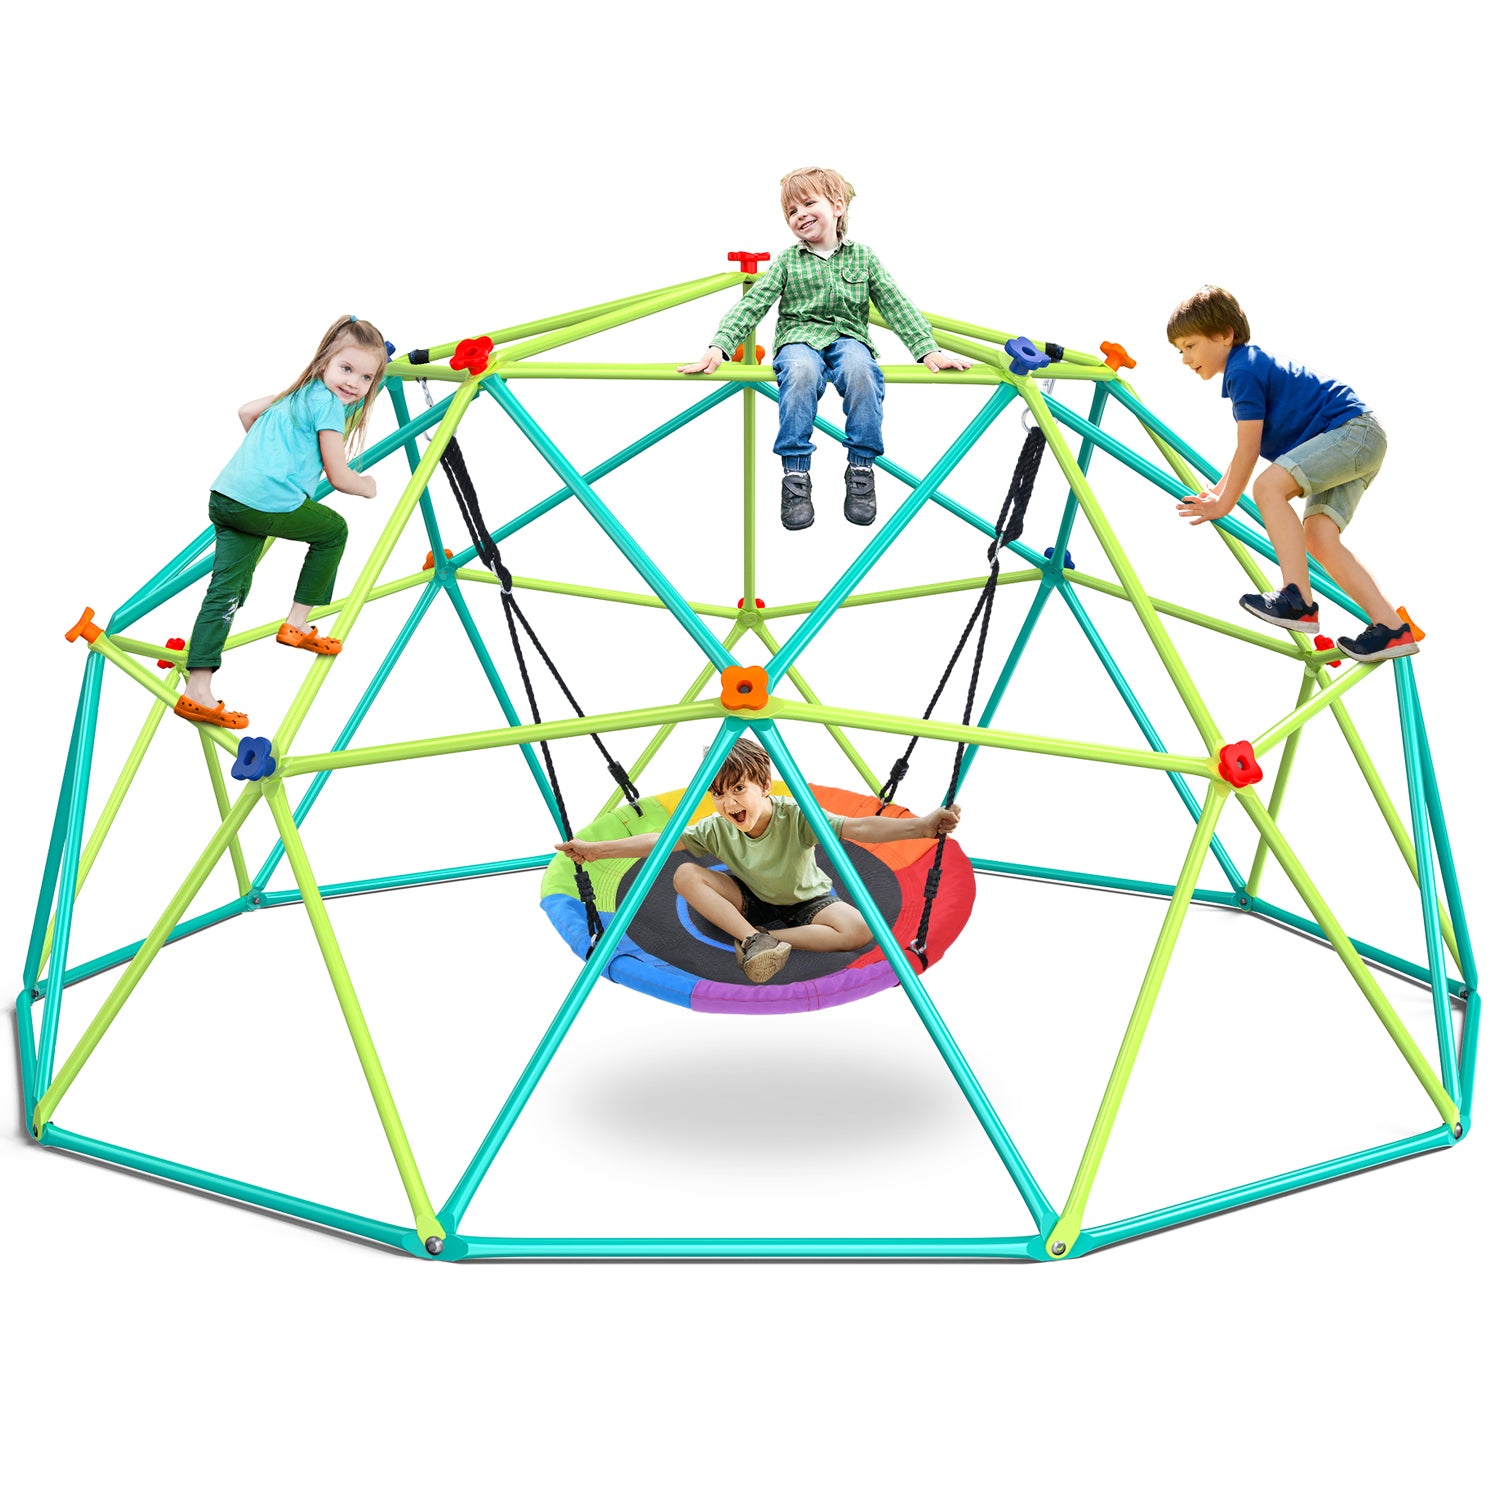 10ft Climbing Dome Swing Set with Saucer Swing, Jungle Gym for Kids Outdoor Backyard, Supports 800lbs